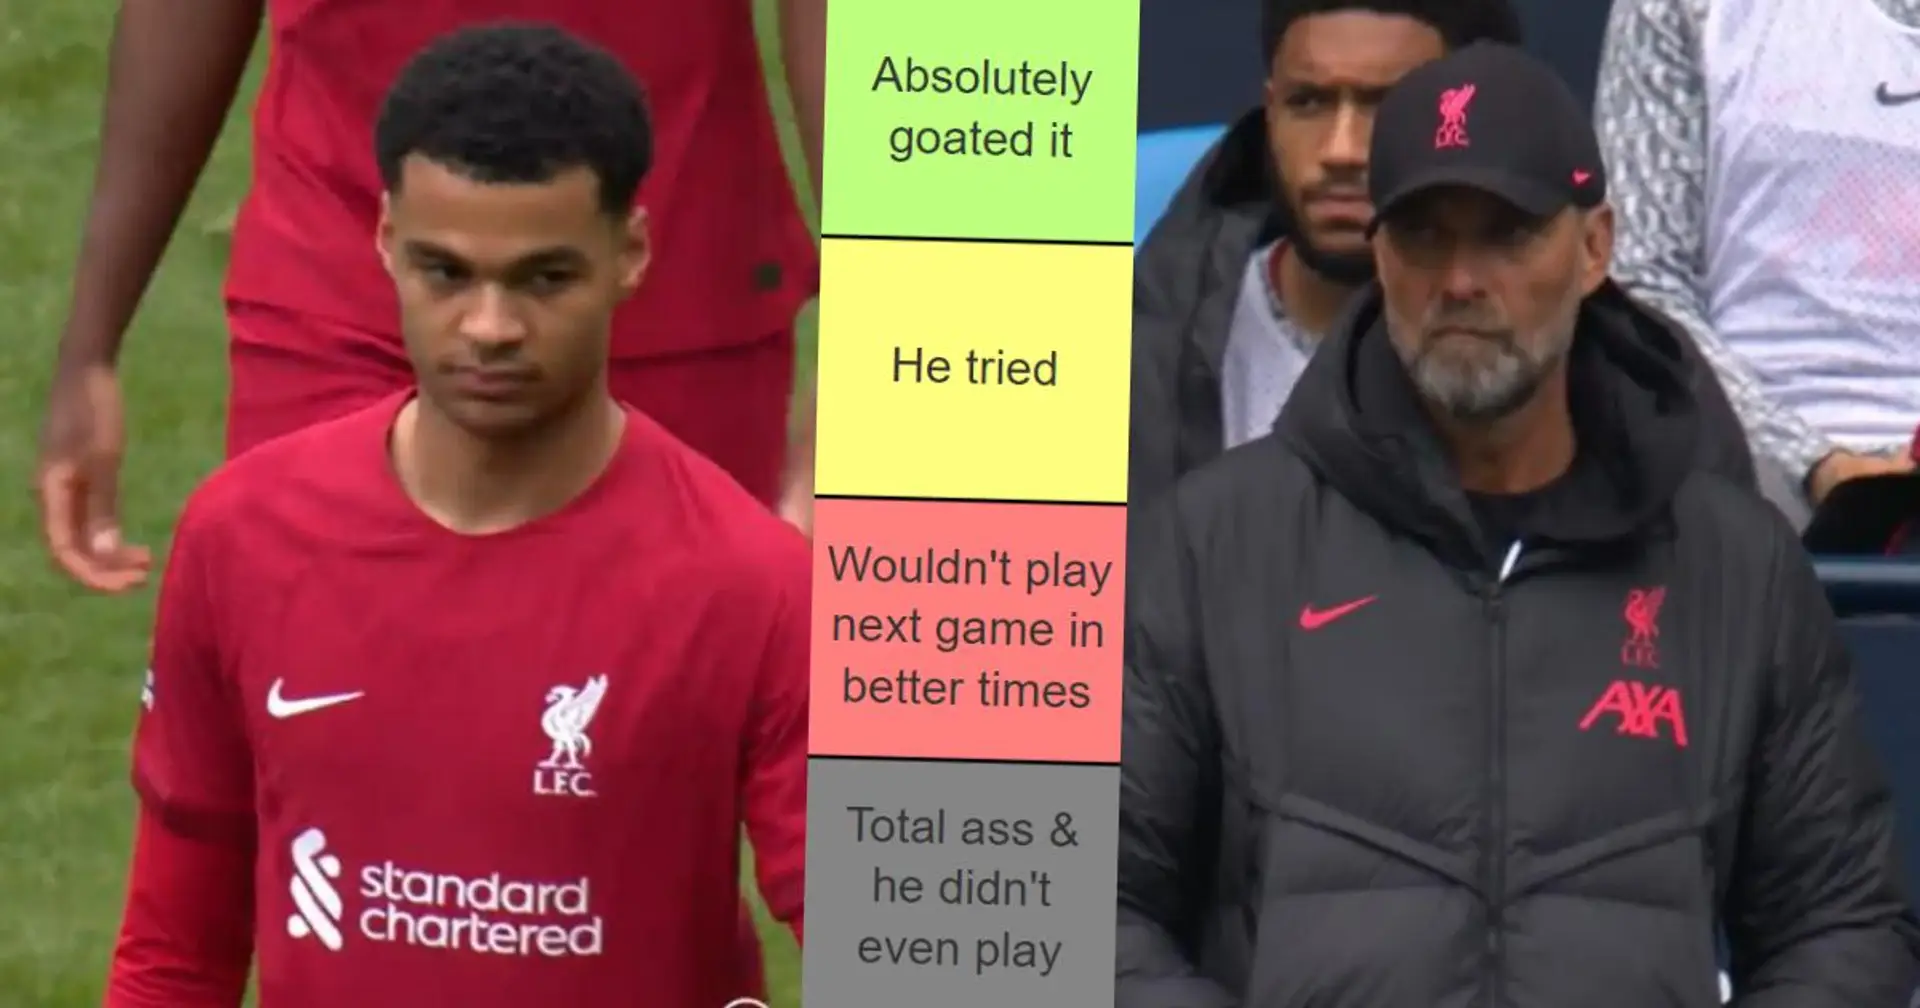 4 at least tried, one disappointed without even playing — Liverpool players' performance tierlist for City loss